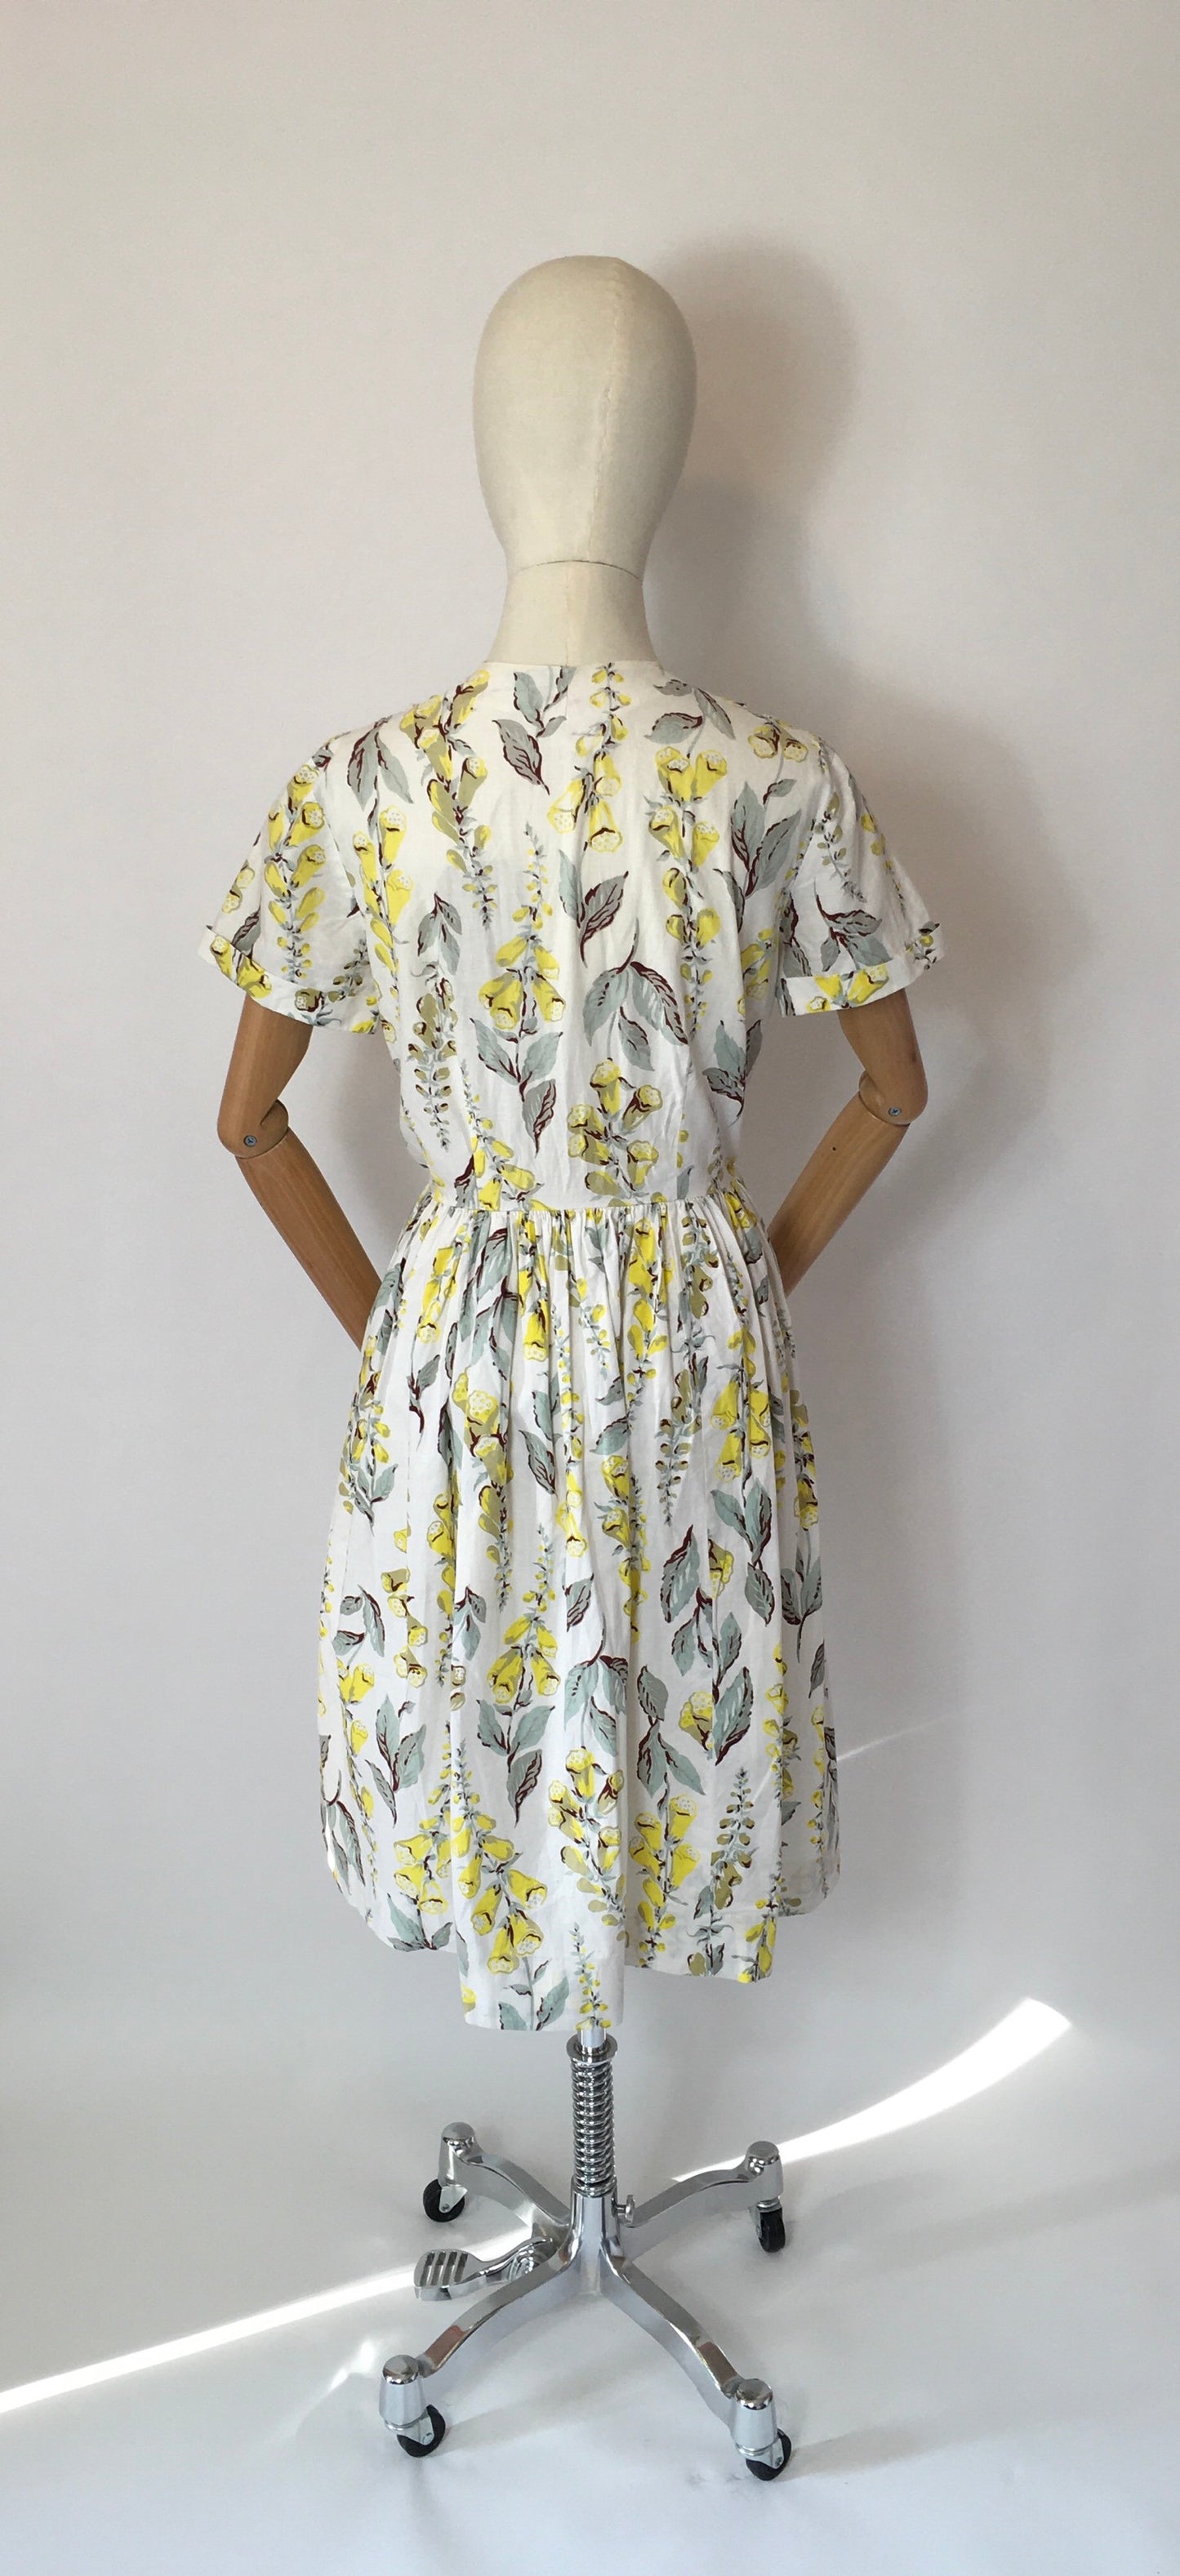 Original 1950s Floral Day Dress - In the Most Beautiful Colour Palette of Buttery Yellows and Mint Greens